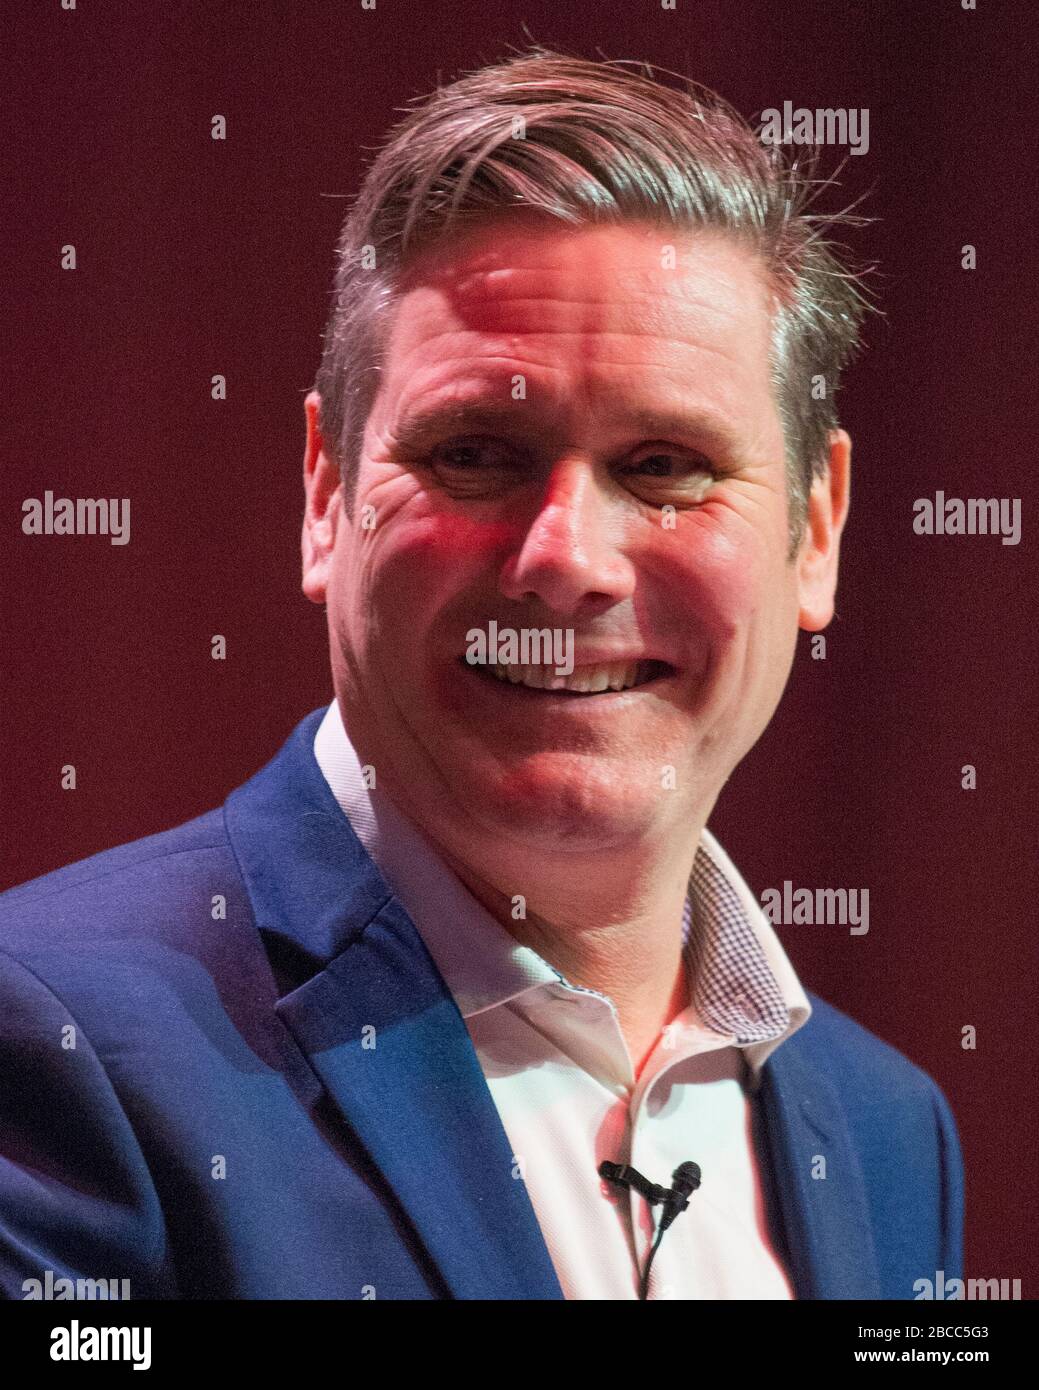 STOCK IMAGE RE-EDITS Glasgow, UK. 15 February 2020. Sir Keir Starmer wins the Leadership for the UK Labour Party with 56.2% of votes in the first round of polling, with Rebecca ling-Bailey on 27.6% and Lisa Nandy on 16.2%. Picture is taken of UK Labour Party Hustings for the Labour Party Leadership 2020. Stock Photo